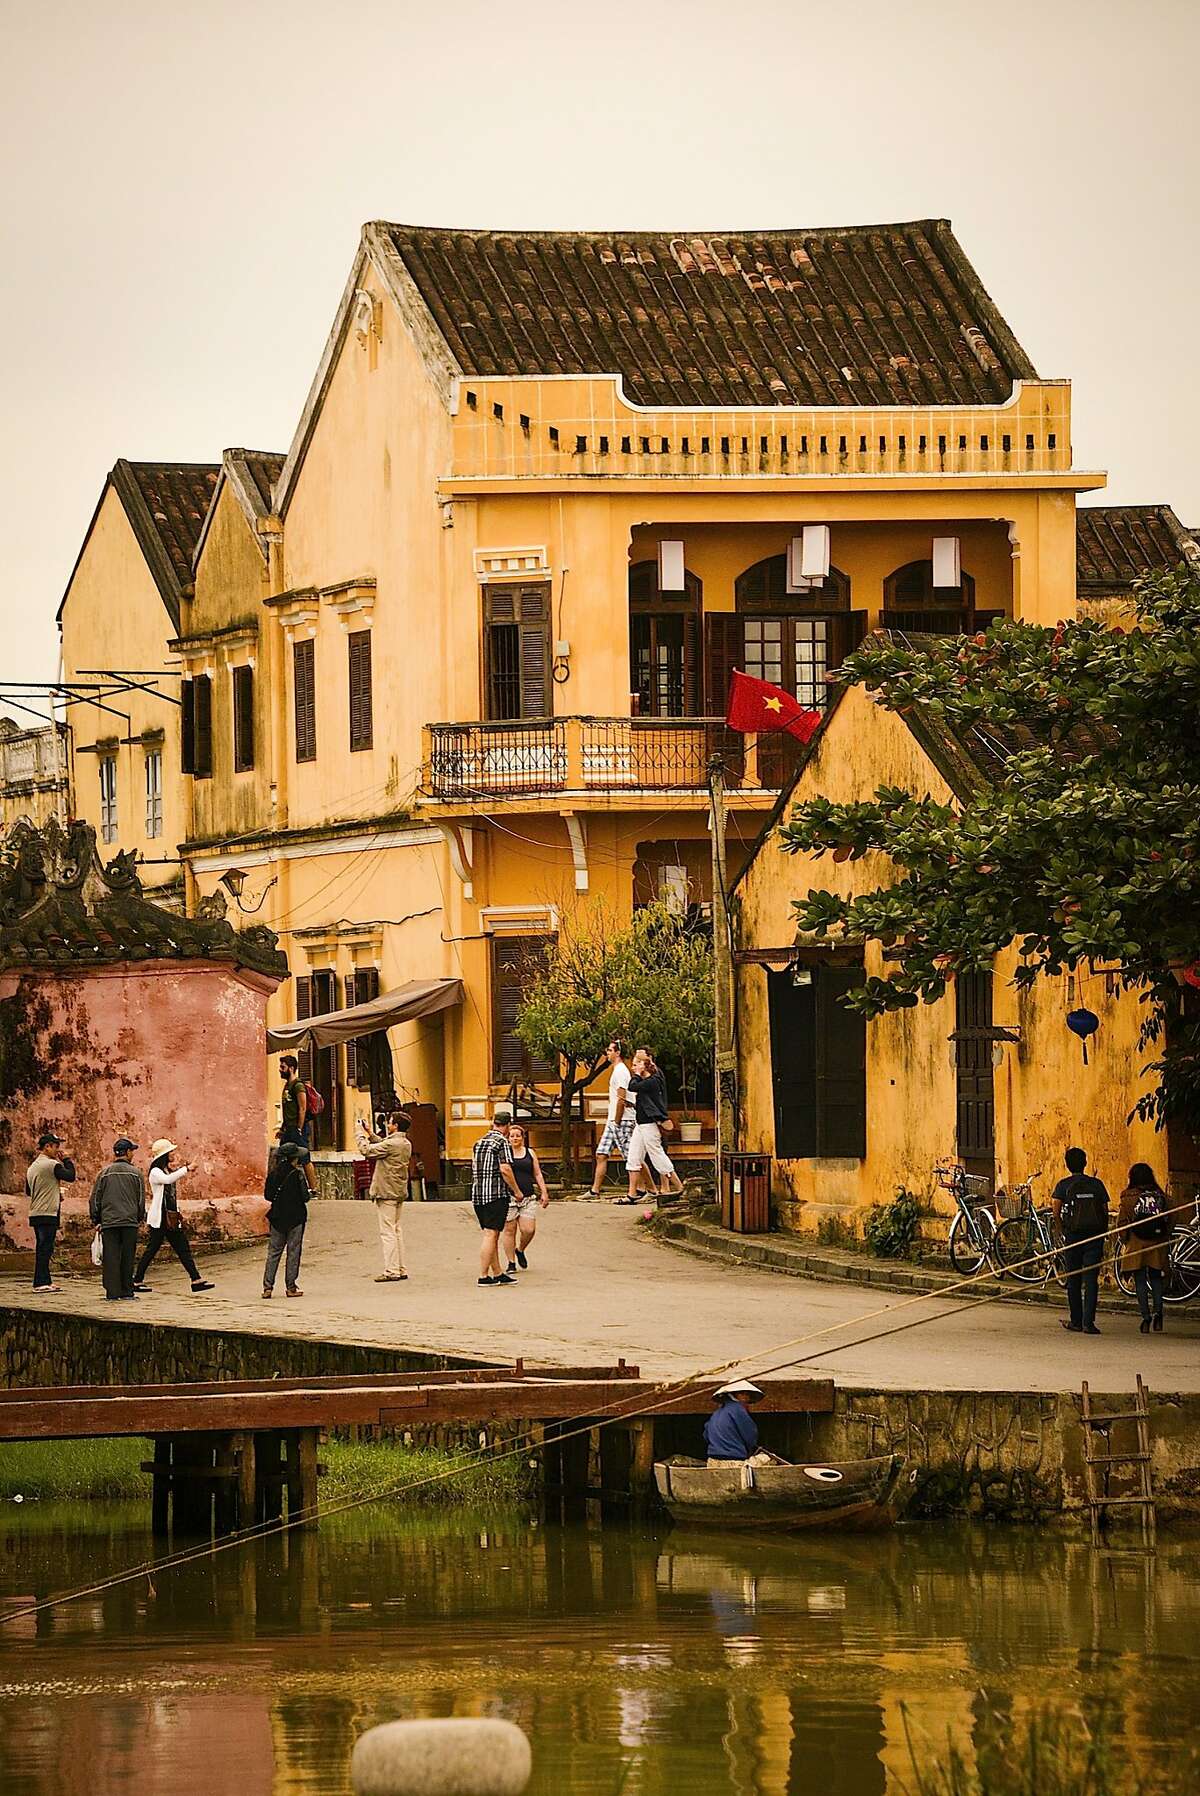 The riverside town of Hoi An was once the most important center of trade in Vietnam.